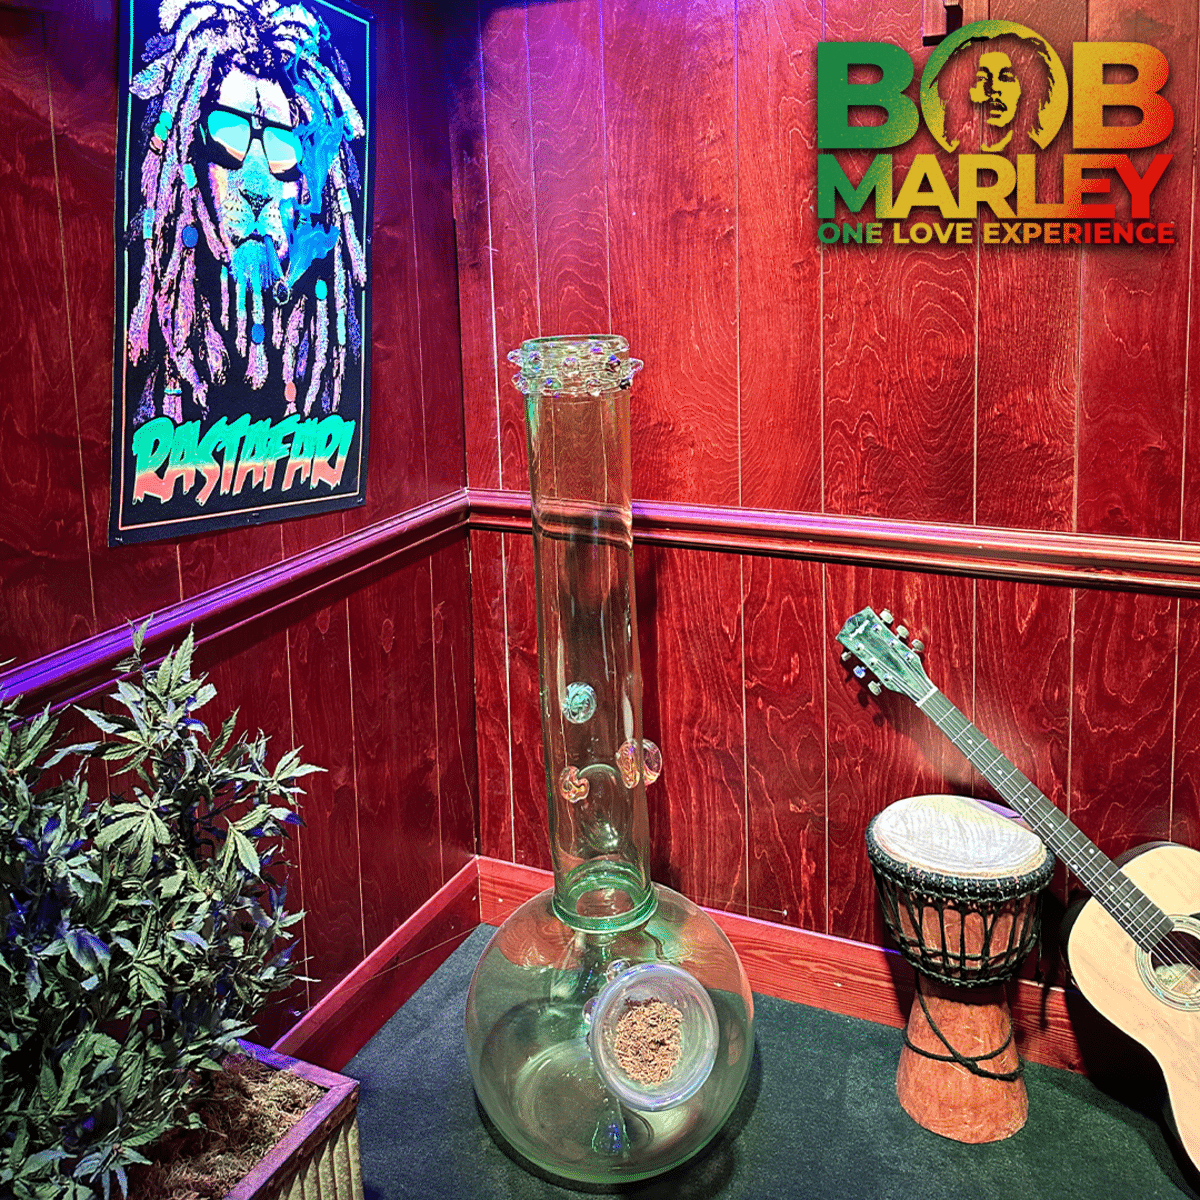 A smoking device sits in a rastafarian room